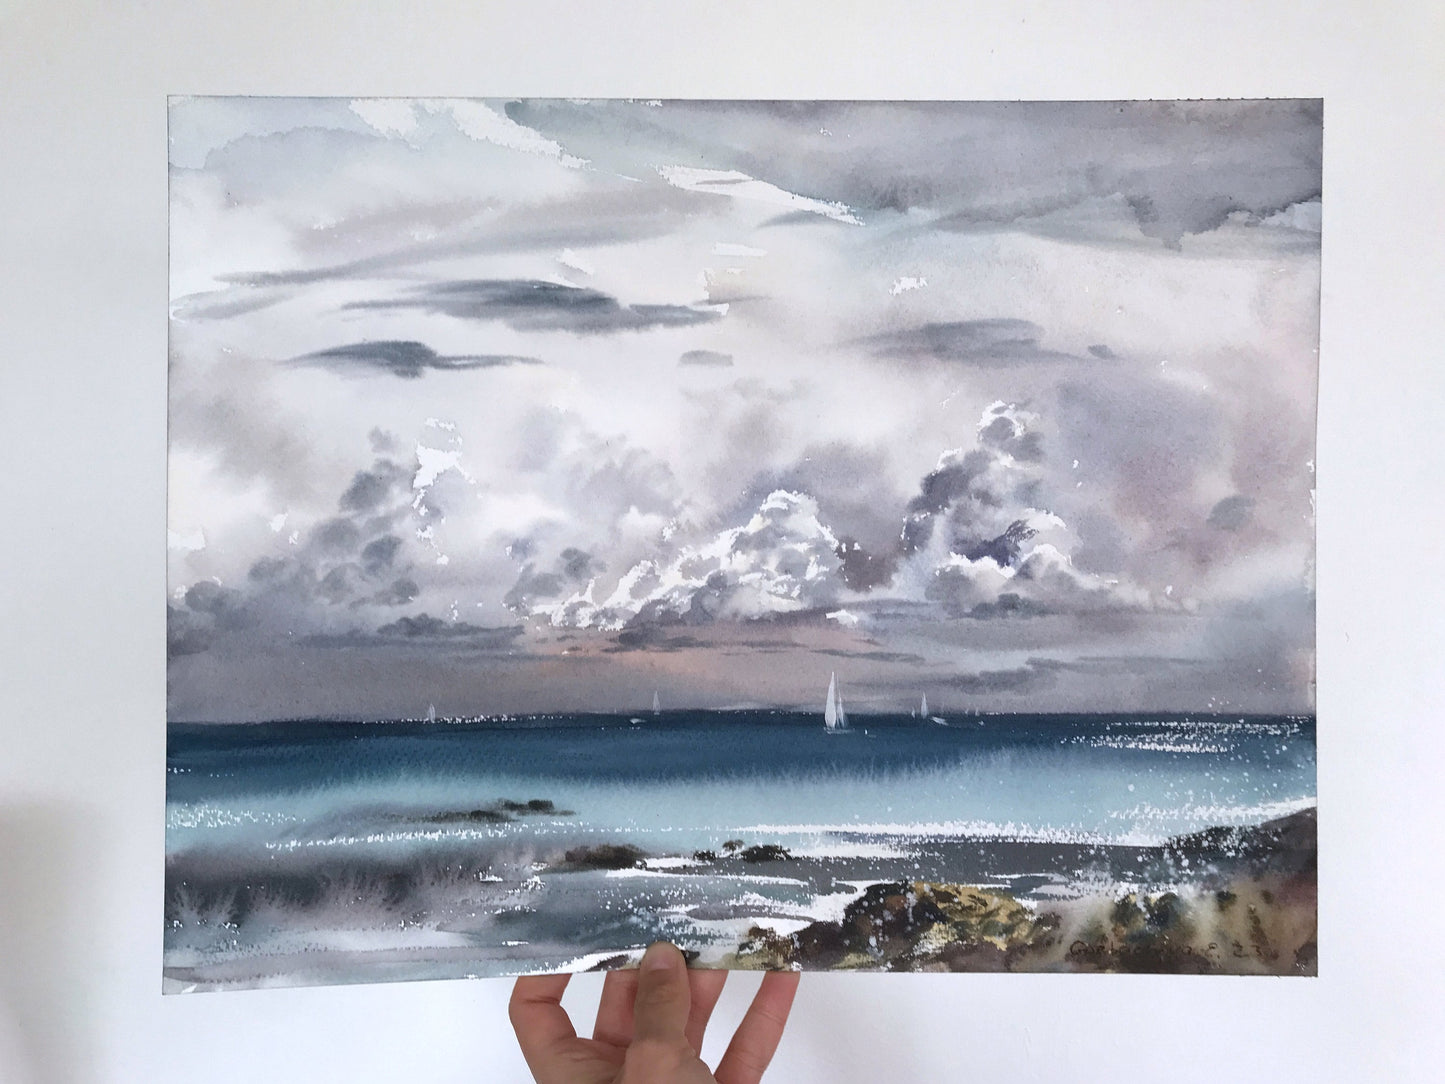 Original Seascape Watercolor Painting, Yacht Art and Clouds - Perfect Coastal Room Wall Decor and Gift for Sea Lovers